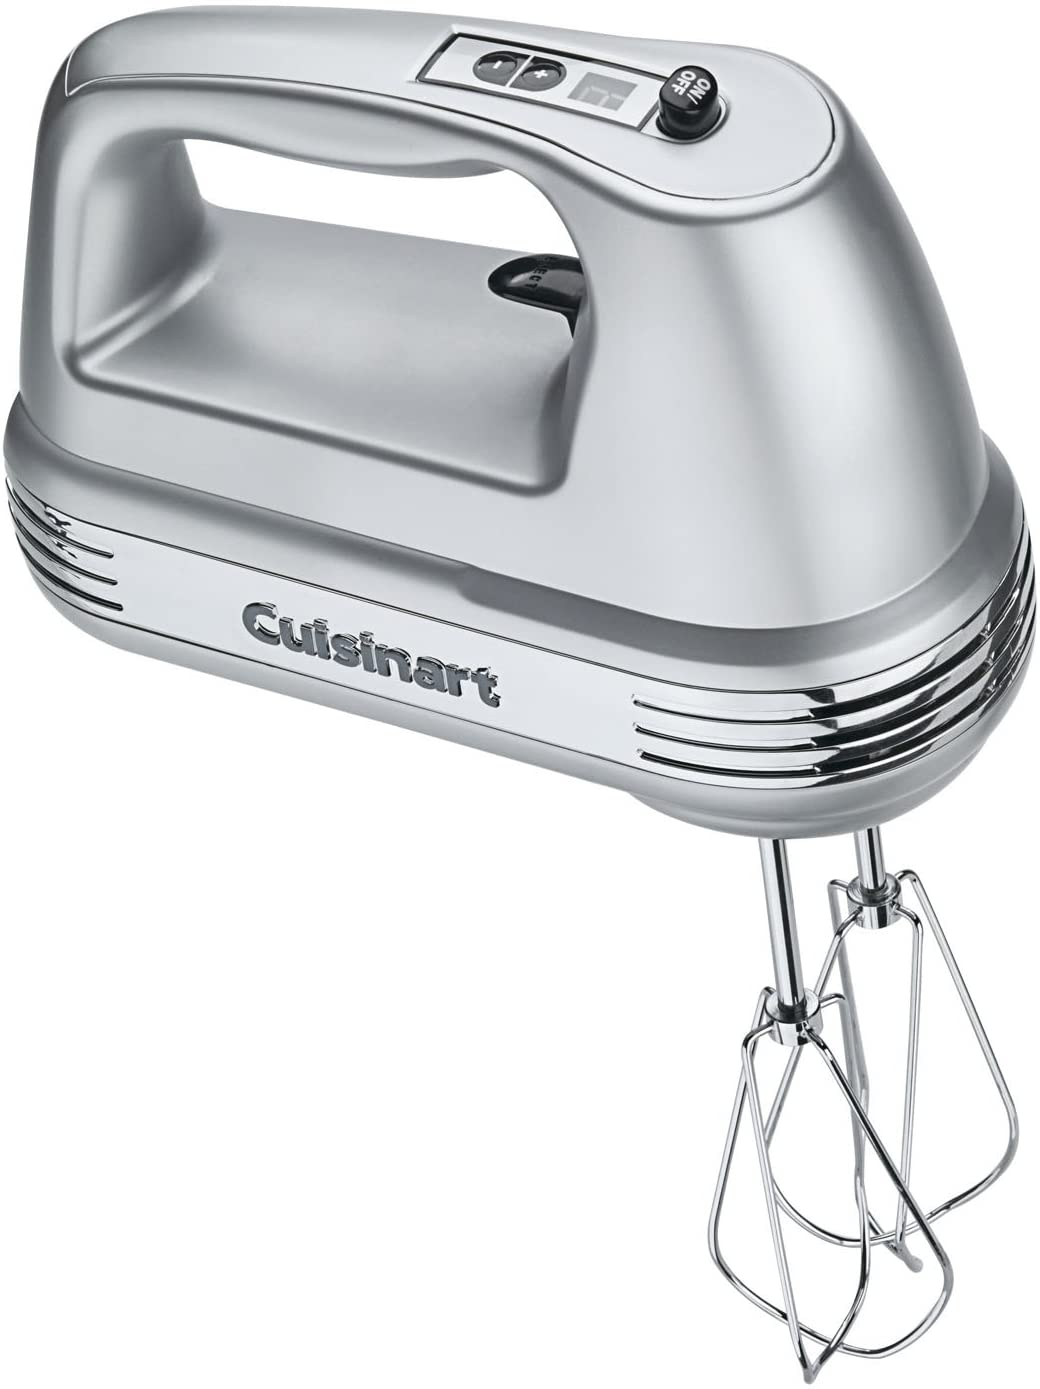 Cuisinart Stand Mixer Residential Stainless Steel Pasta Roller and